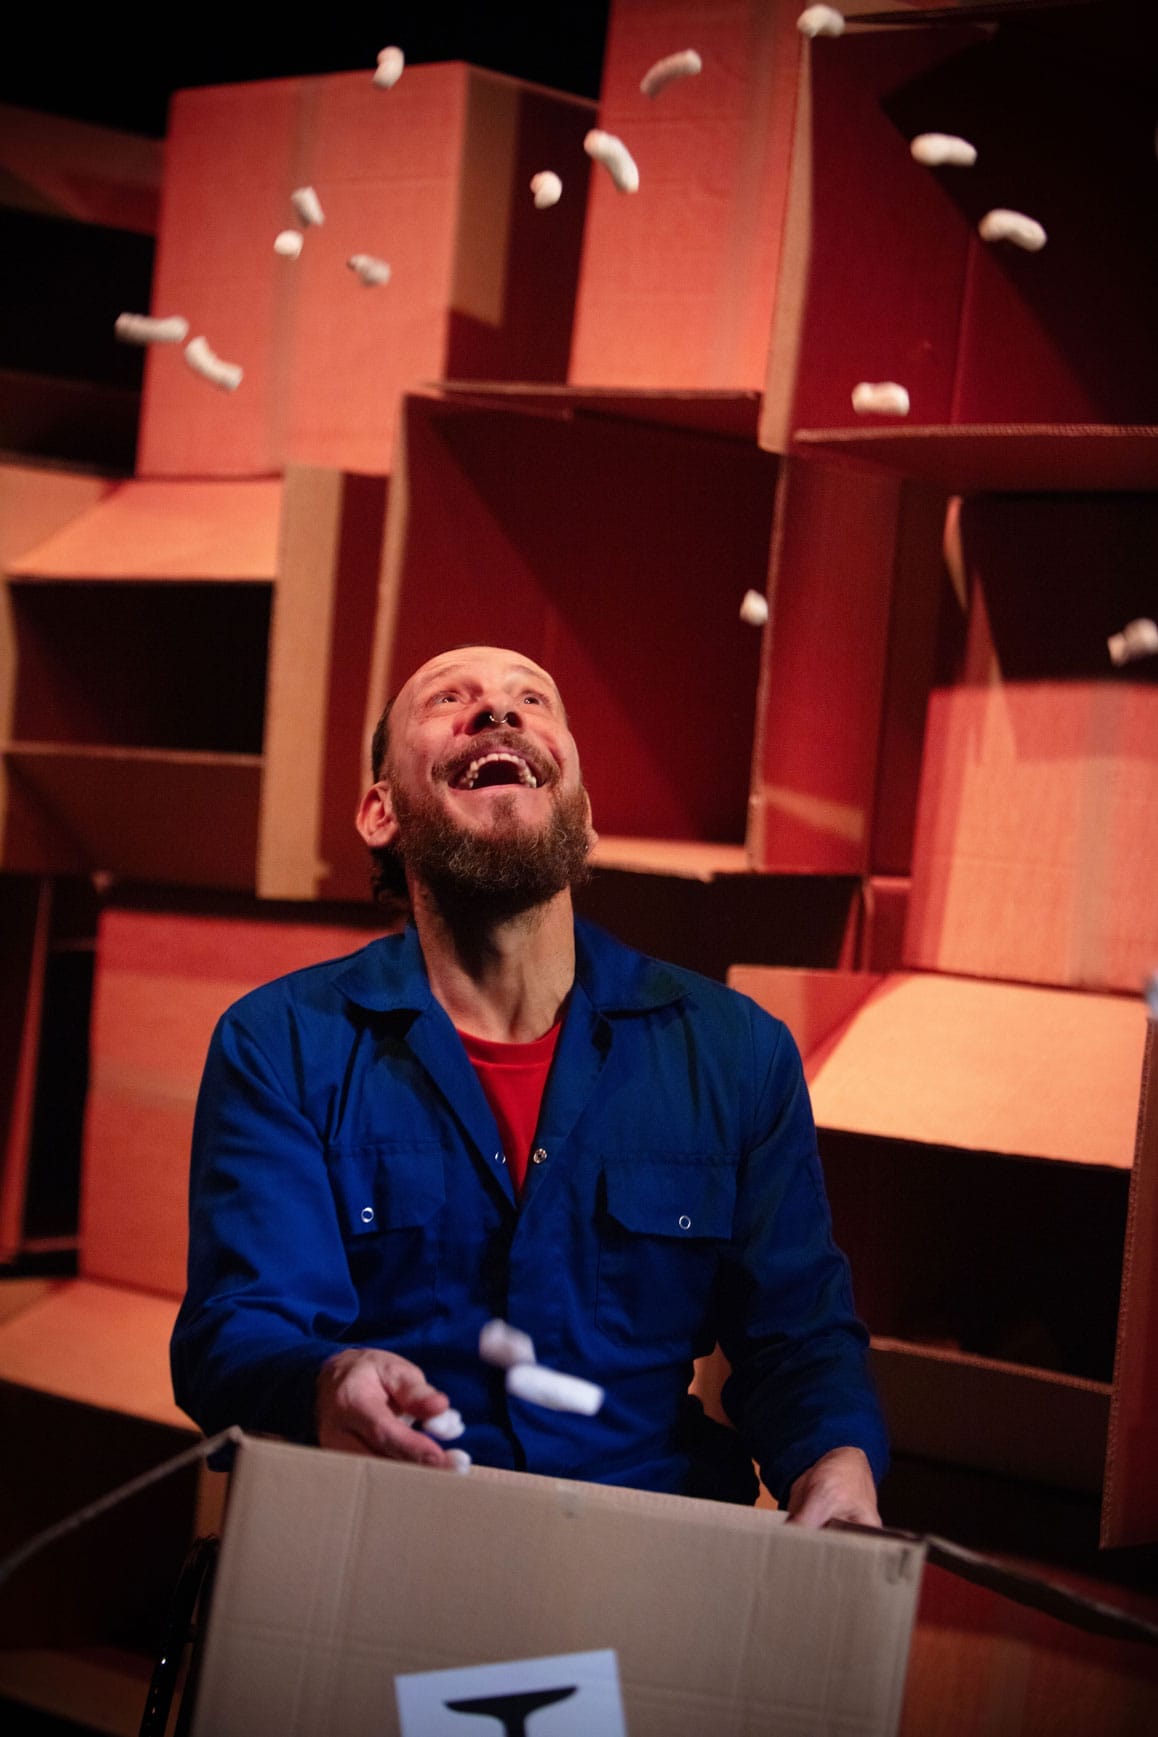 Daryl, a white man with a beard in light blue overalls, looks upwards as white packing peanuts rain down on him. He is surrounded by cardboard boxes